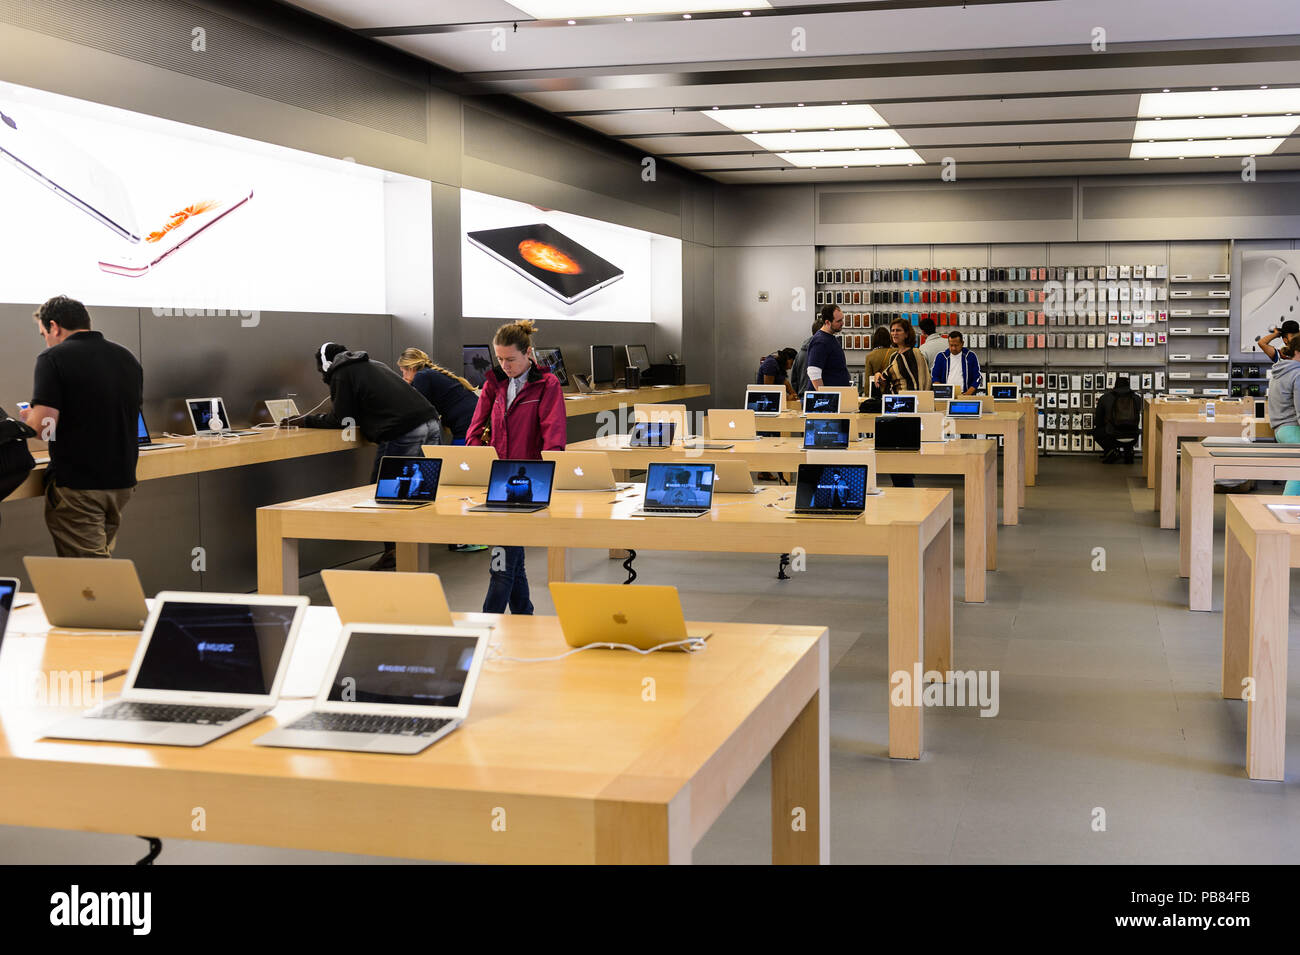 New York Usa Sep 22 2015 Interior Of The Apple Store On